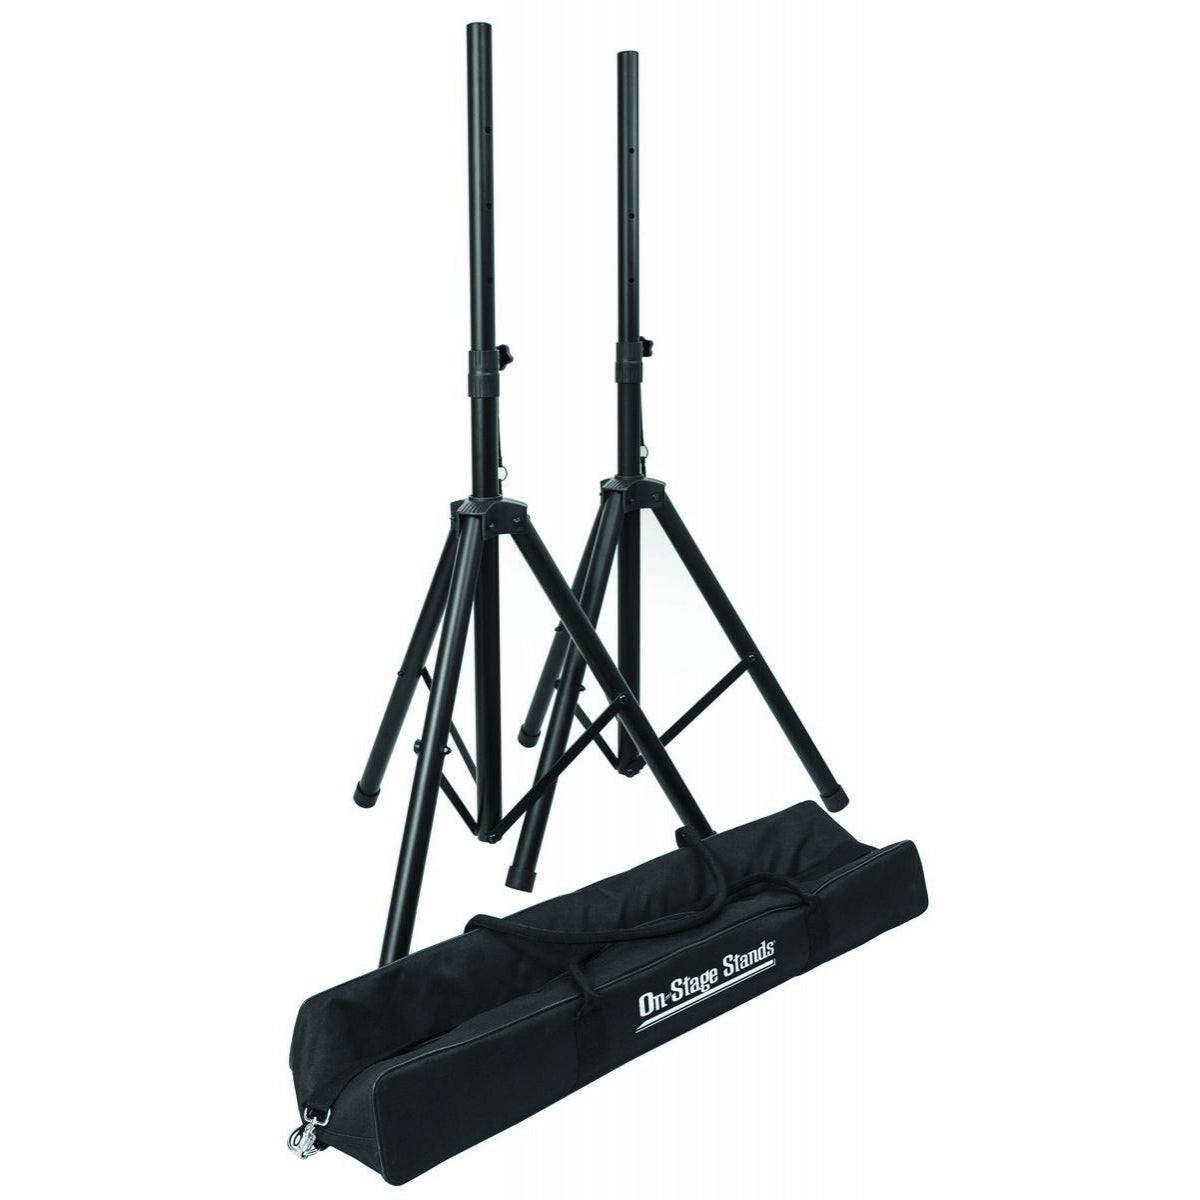 On Stage SSP7750 Compact Speaker Stands - PAIR